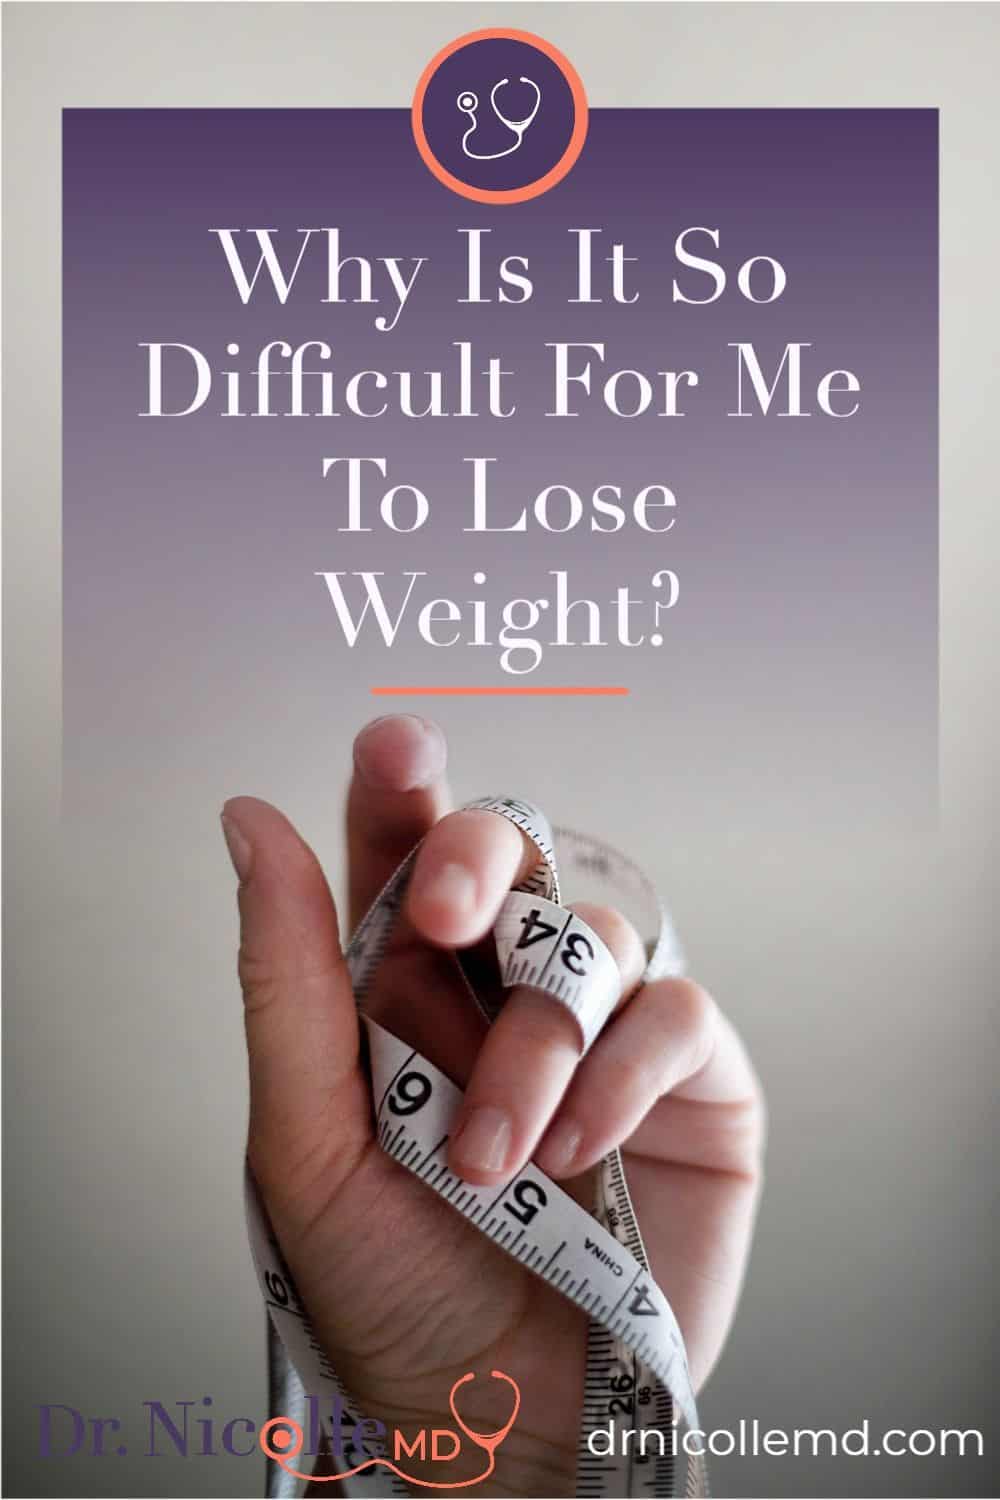 Why You May Not Be Losing Weight